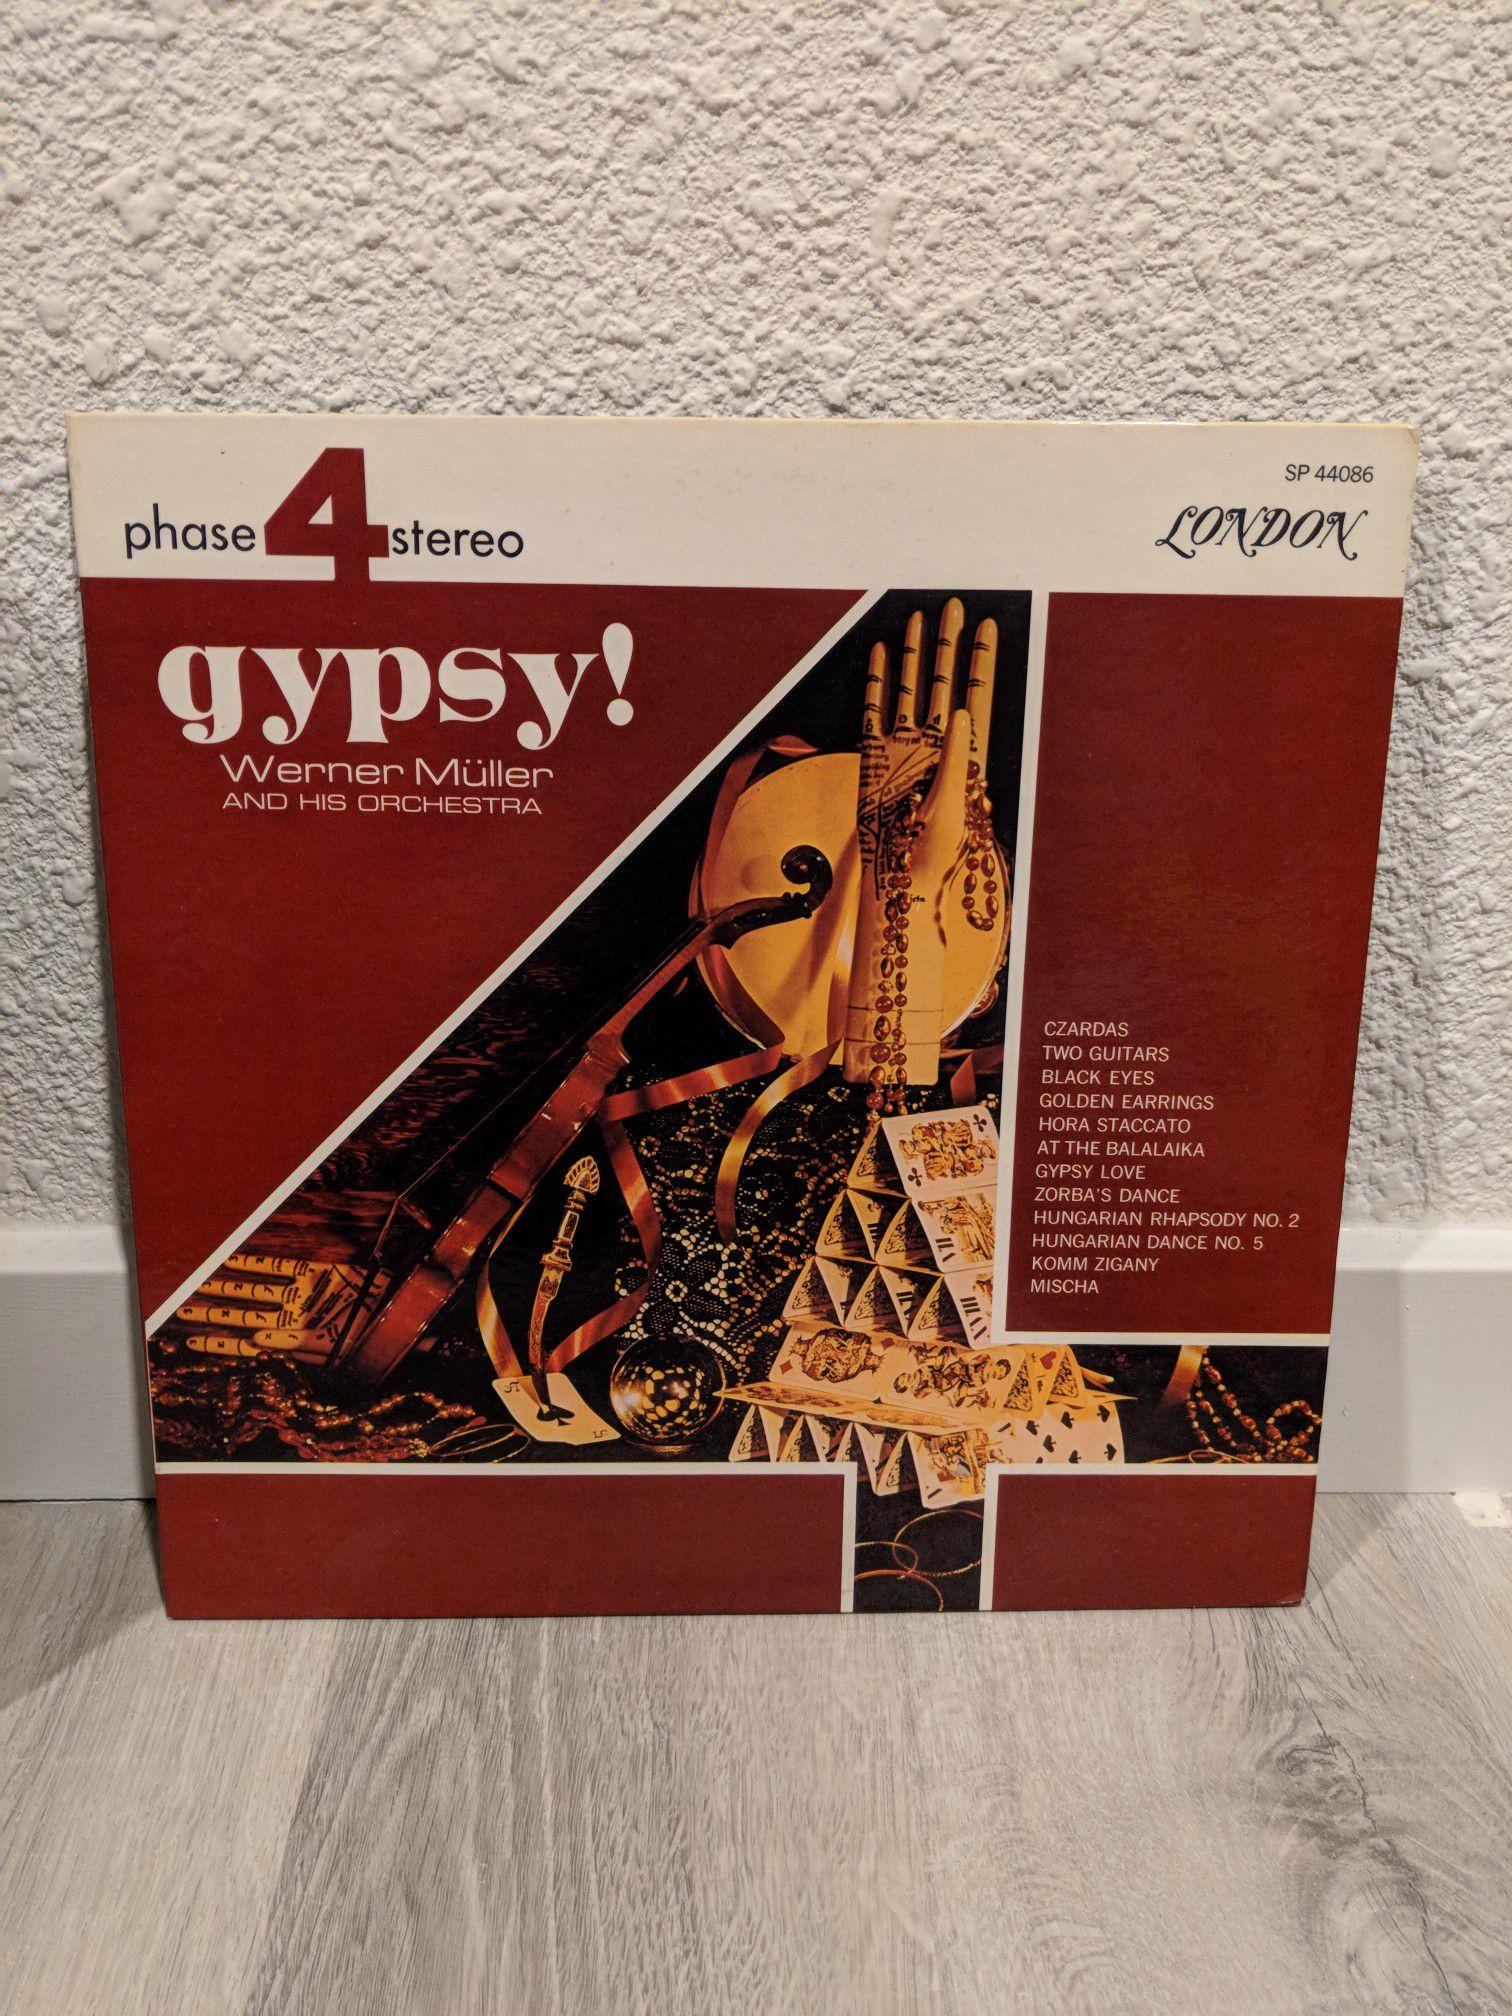 Vinyl- Werner Muller and his orchestra- Gypsy